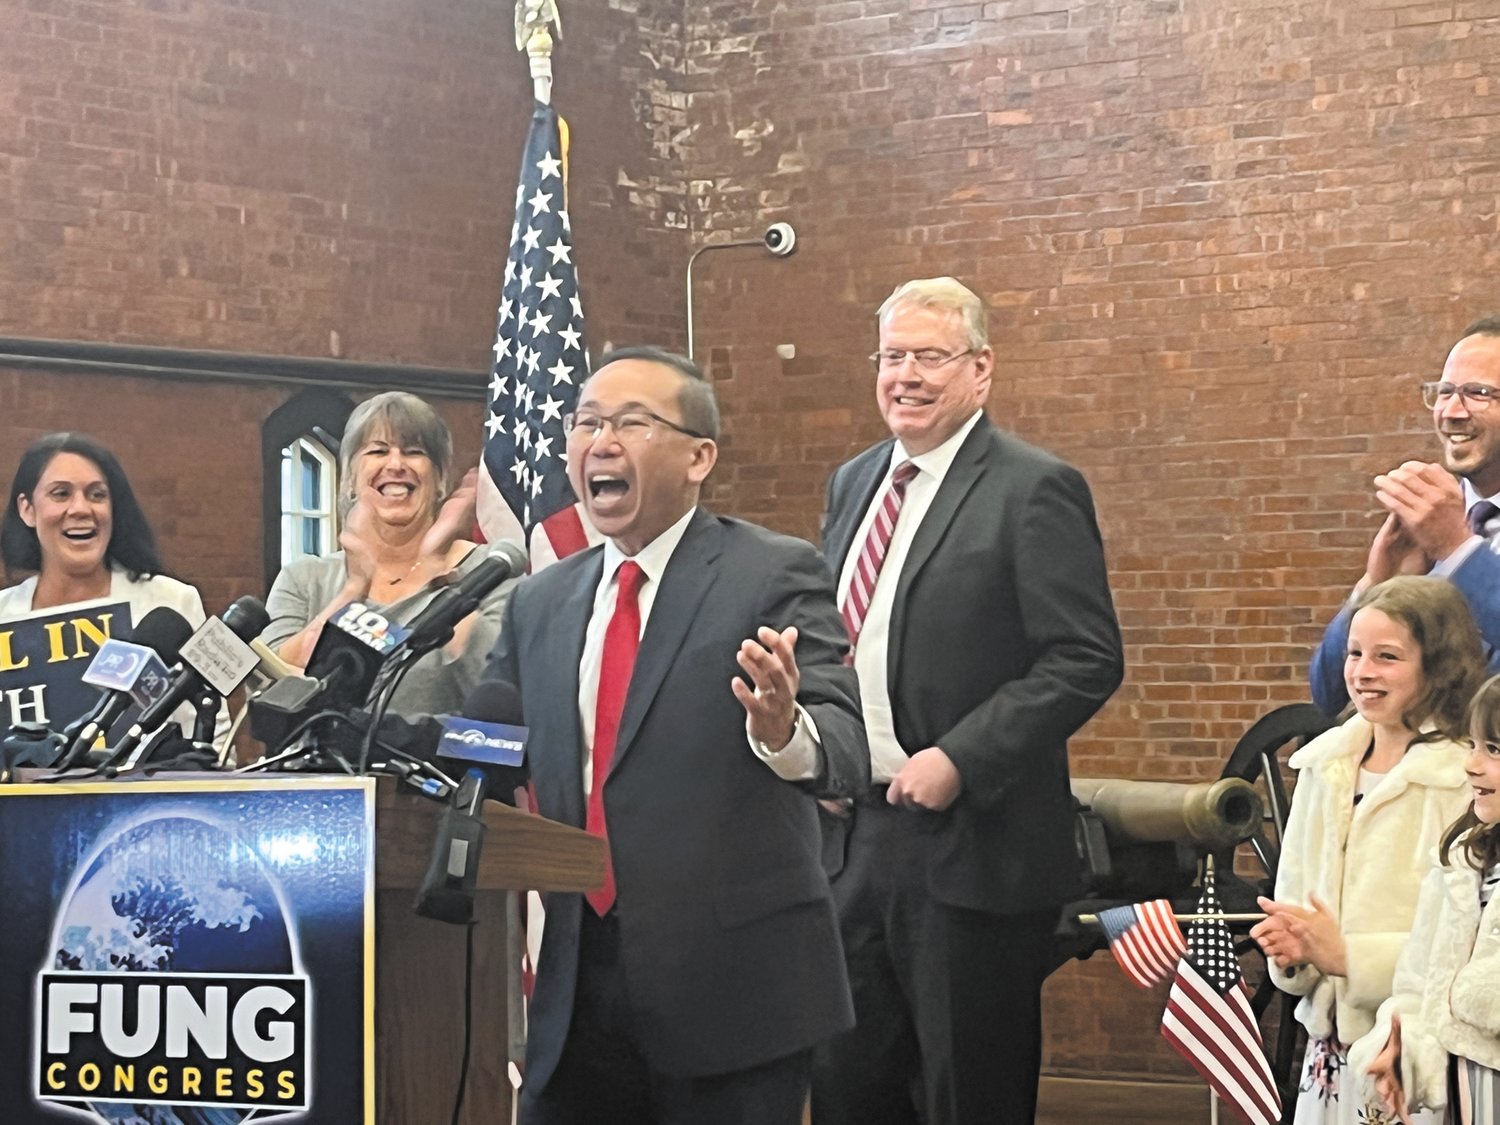 SHOUT OUT FOR CONGRESS: Flanked by Cranston City Councilors Nicole Renzulli and Matt Reilly former Cranston Mayor Allan Fung officially kicked off his campaign for Congress on Tuesday afternoon at the Varnum Memorial Armory in East Greenwich.  Fung is set to face off against Bob Lancia in the Republican Primary.  (Warwick Beacon photo)